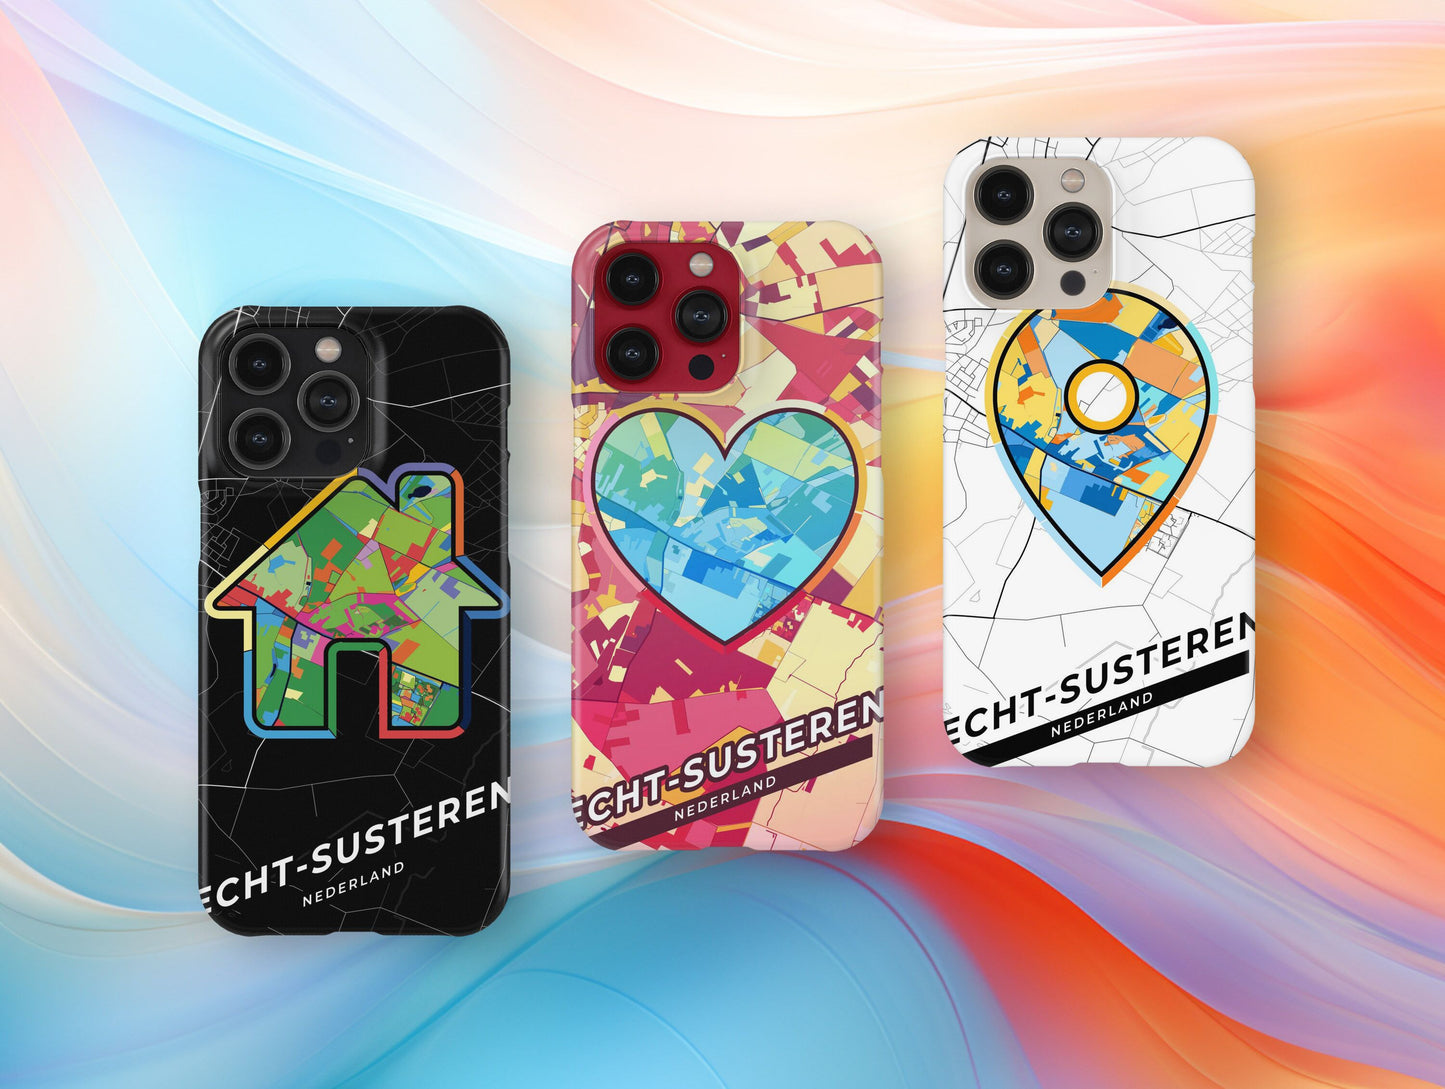 Echt-Susteren Netherlands slim phone case with colorful icon. Birthday, wedding or housewarming gift. Couple match cases.